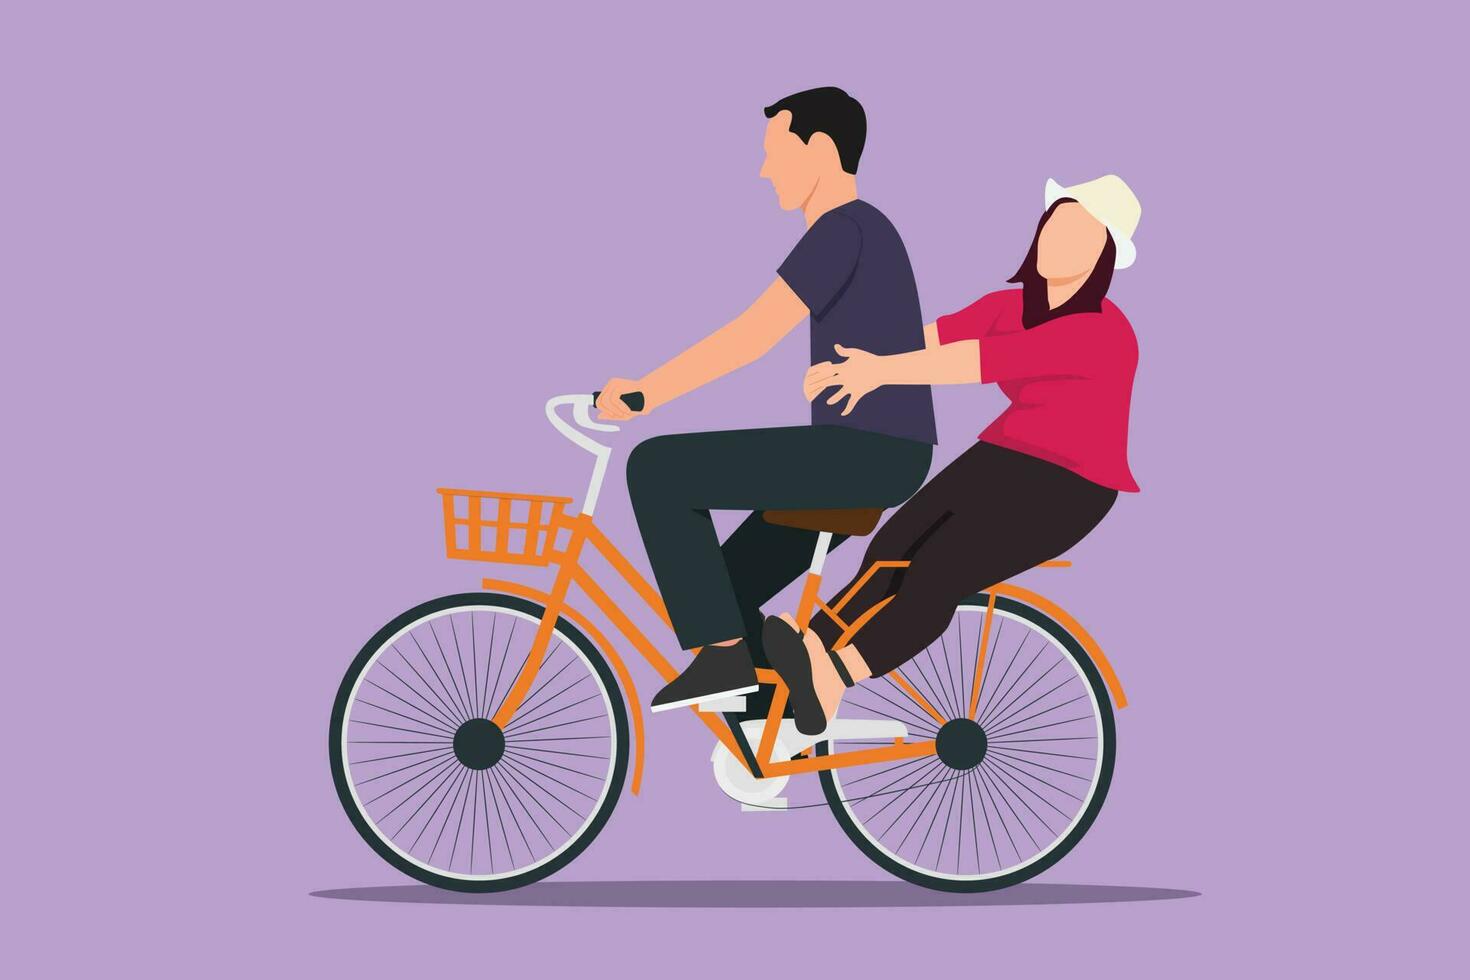 Cartoon flat style drawing side view of couple have fun riding on bike. Romantic cycling couple holding hands. Husband and wife riding bike together on wedding day. Graphic design vector illustration